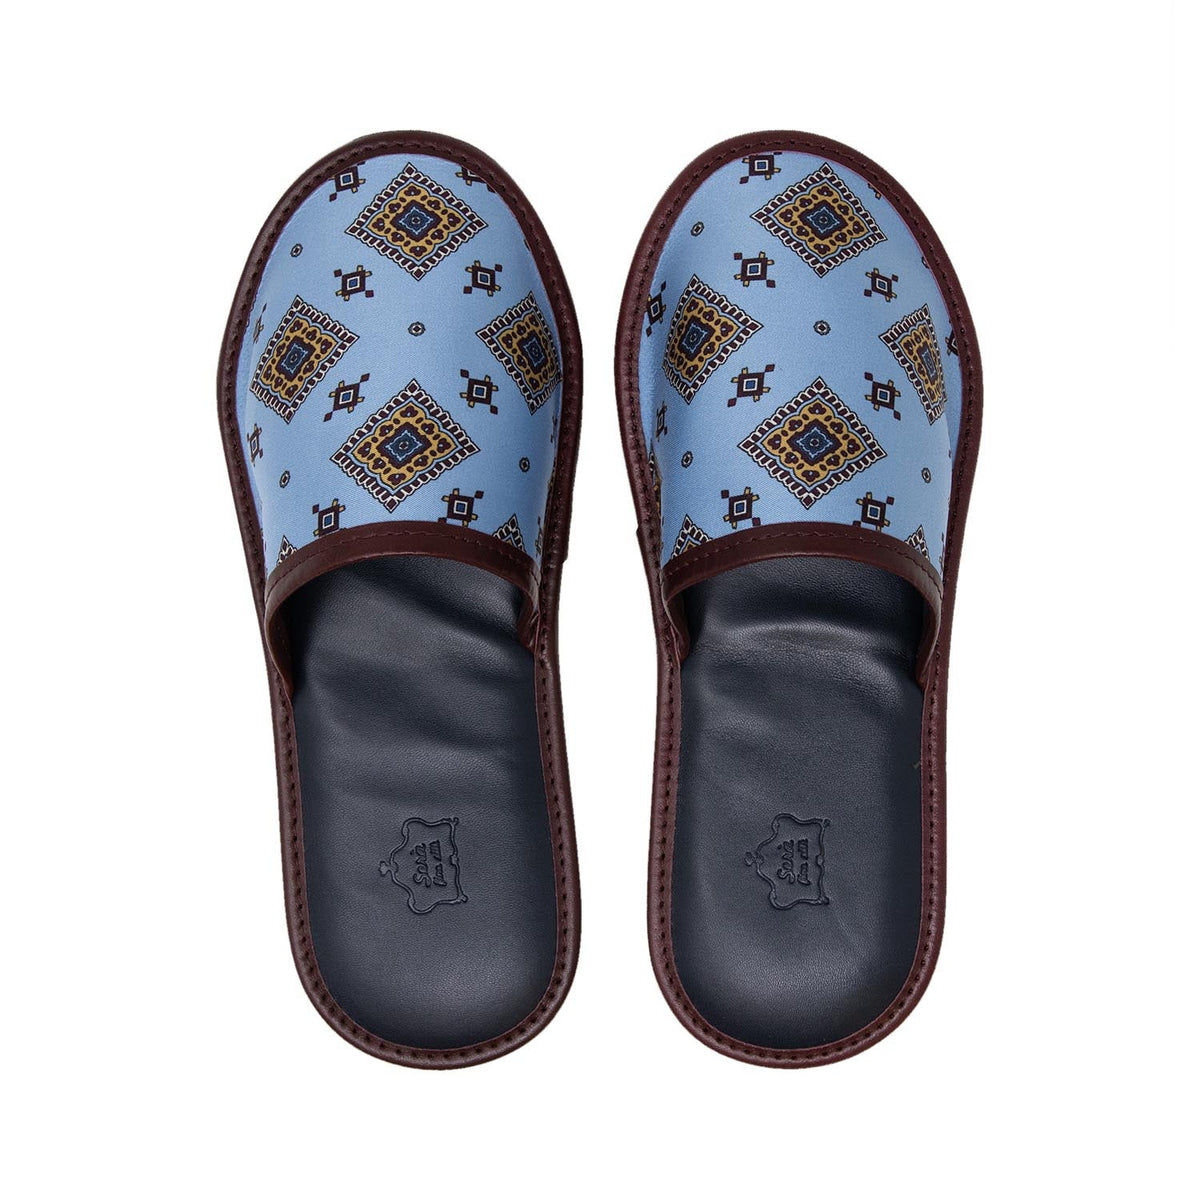 serà fine silk - Light Blue and Burgundy with Medallions Silk & Leather Slippers